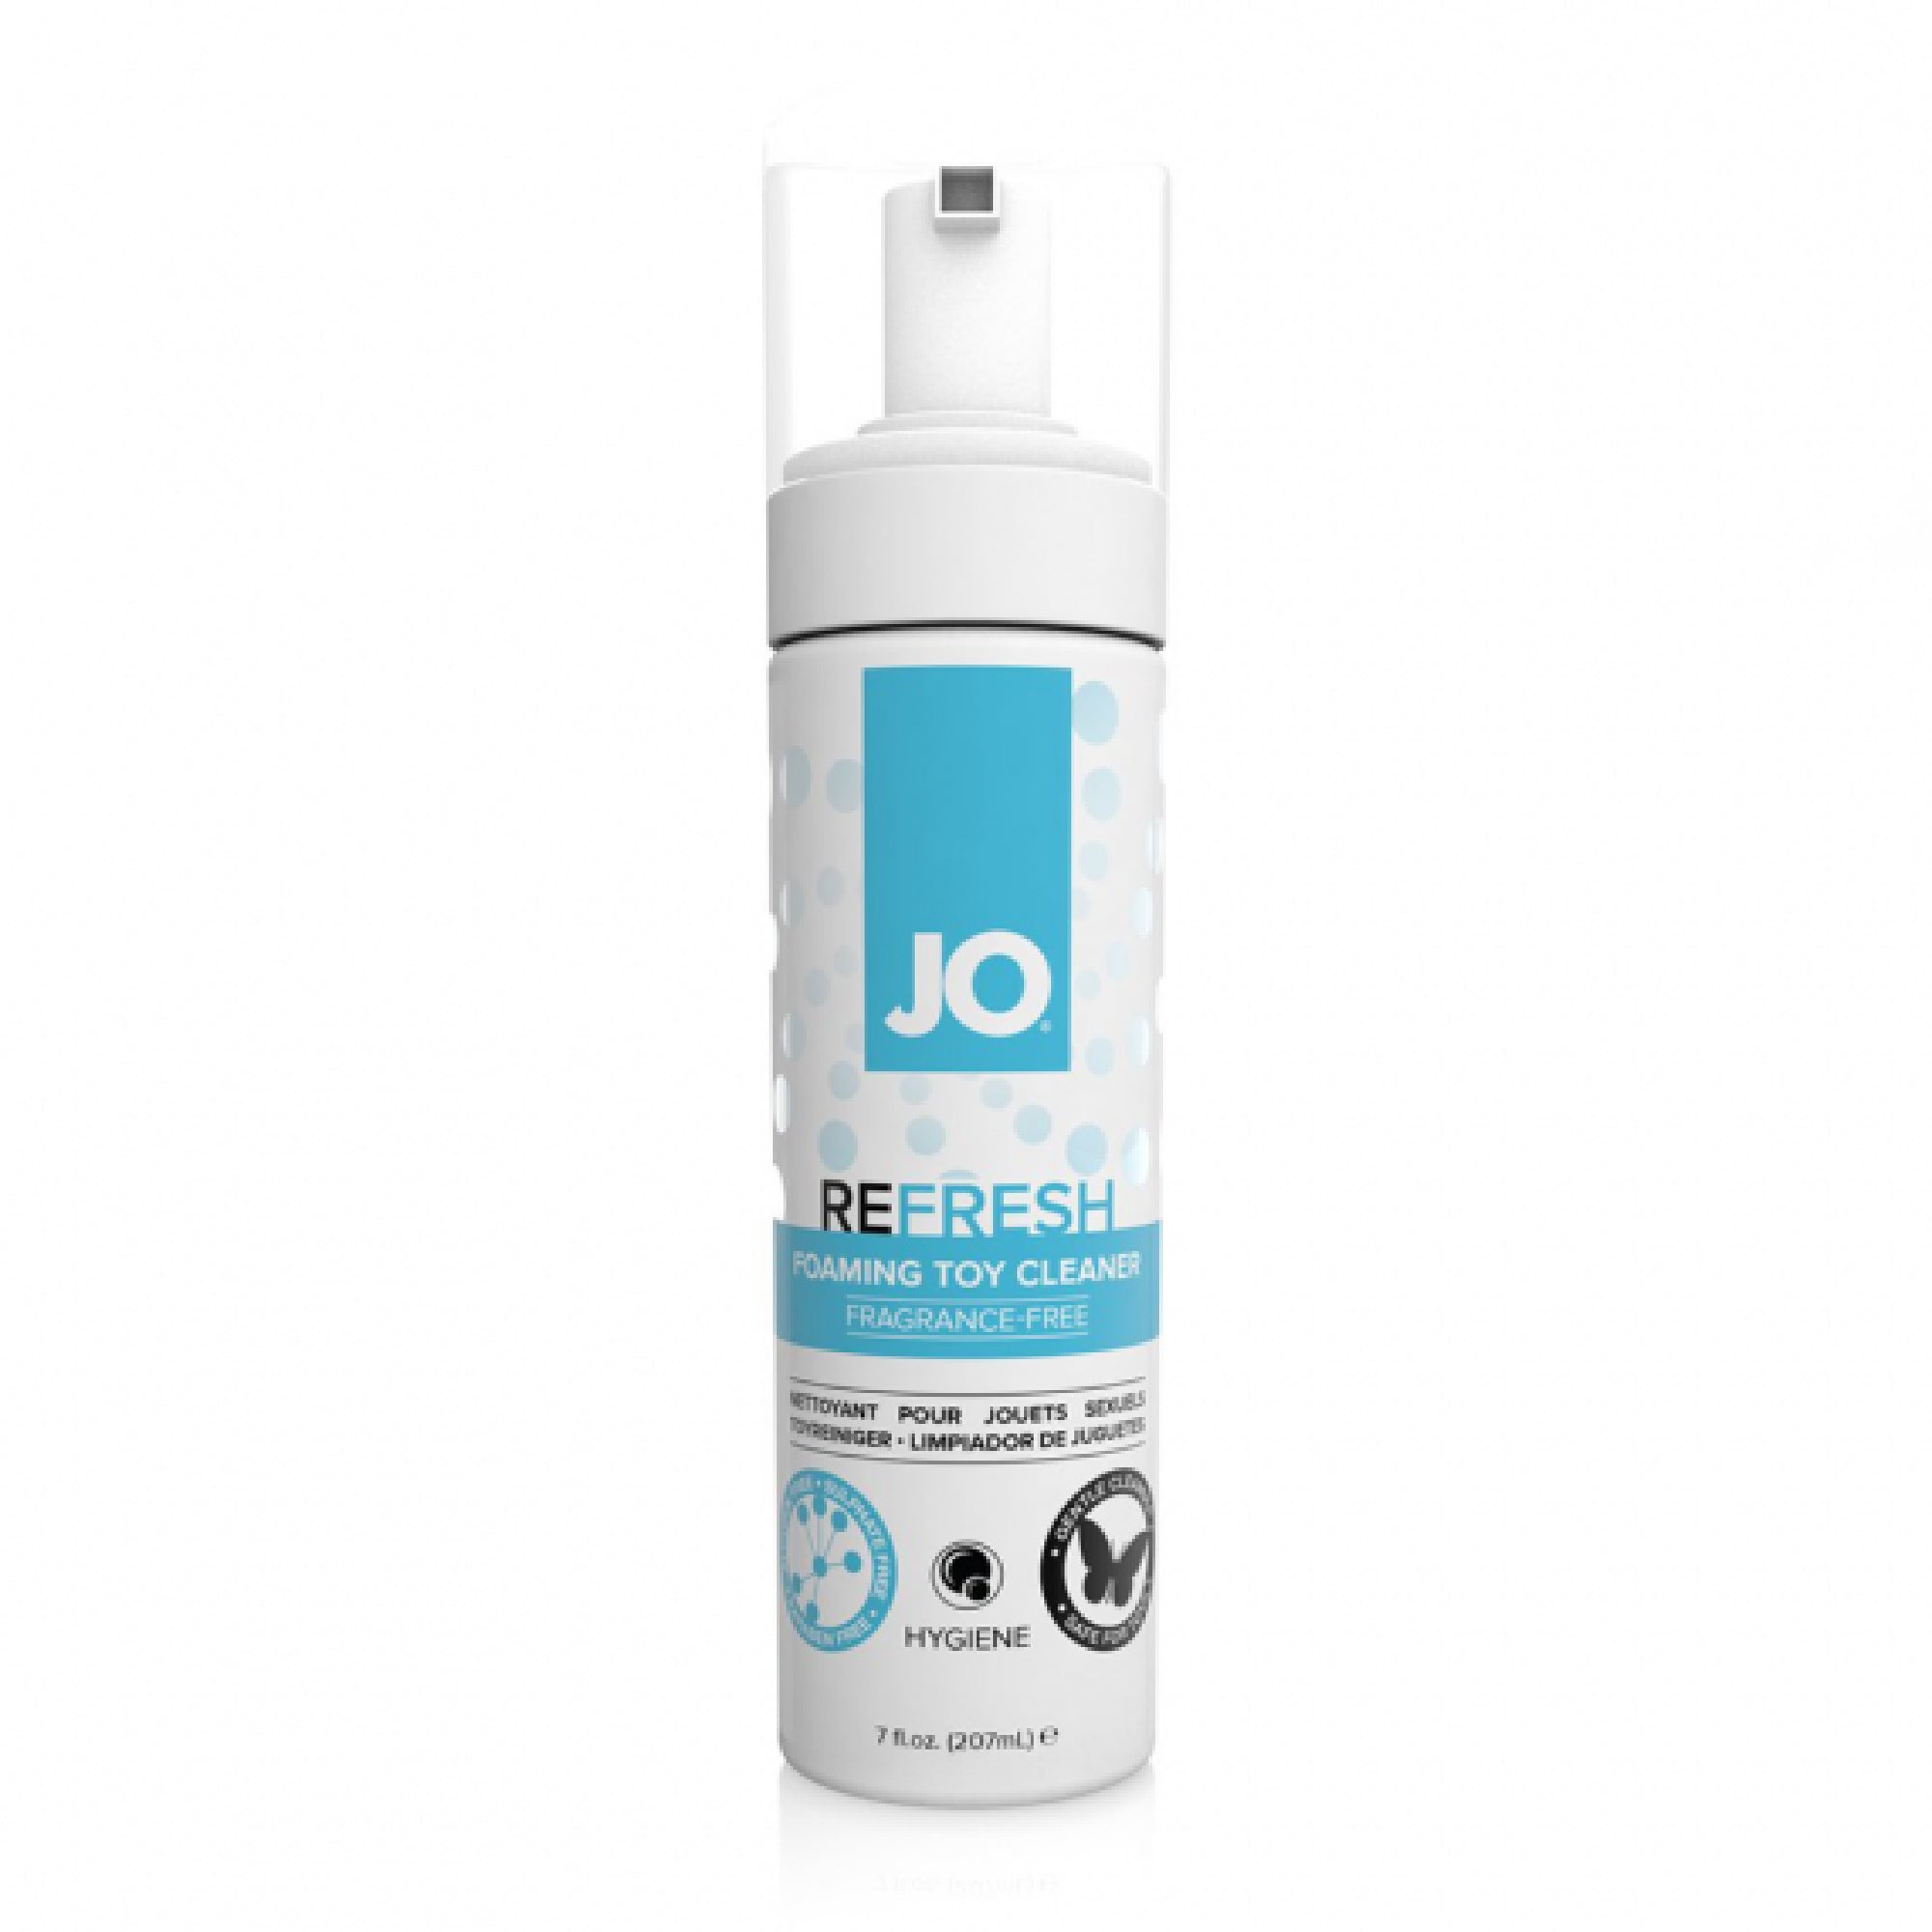 Shop the Fragrance Free JO Refresh Foaming Toy Cleaner 7 floz / 207 ml